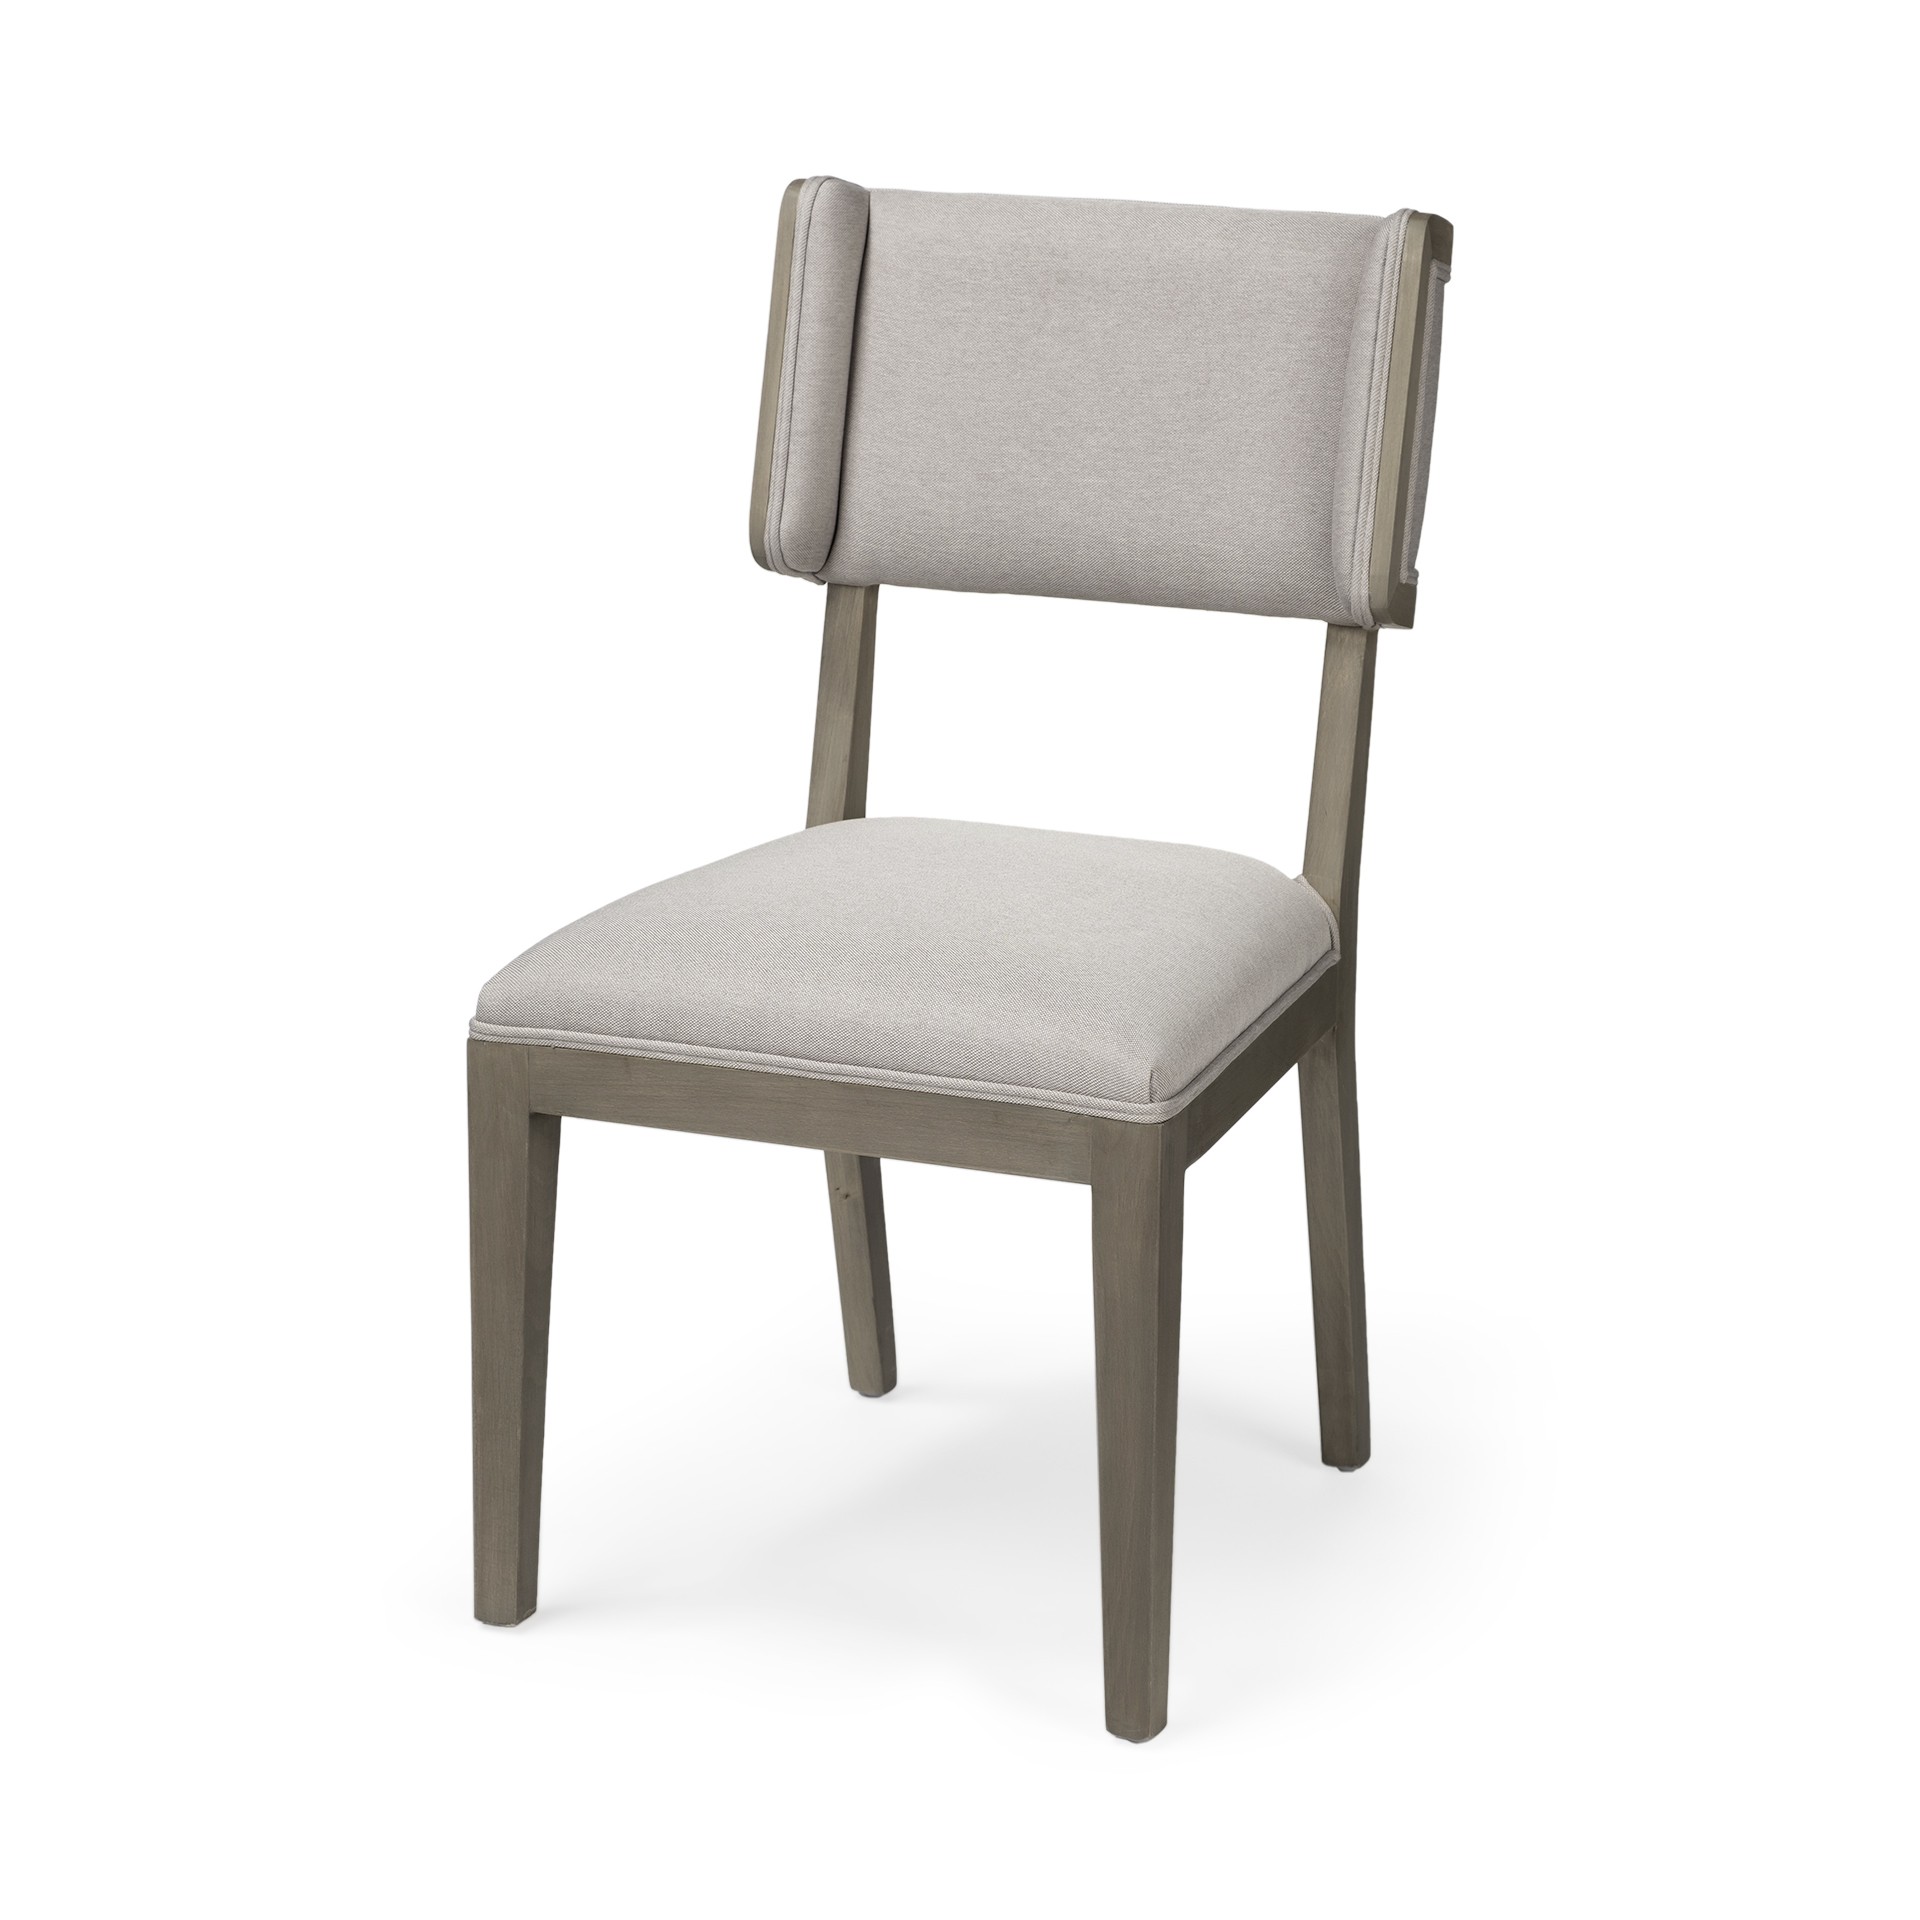 Grey Fabric Seat with Brown Wood Frame Dining Chair